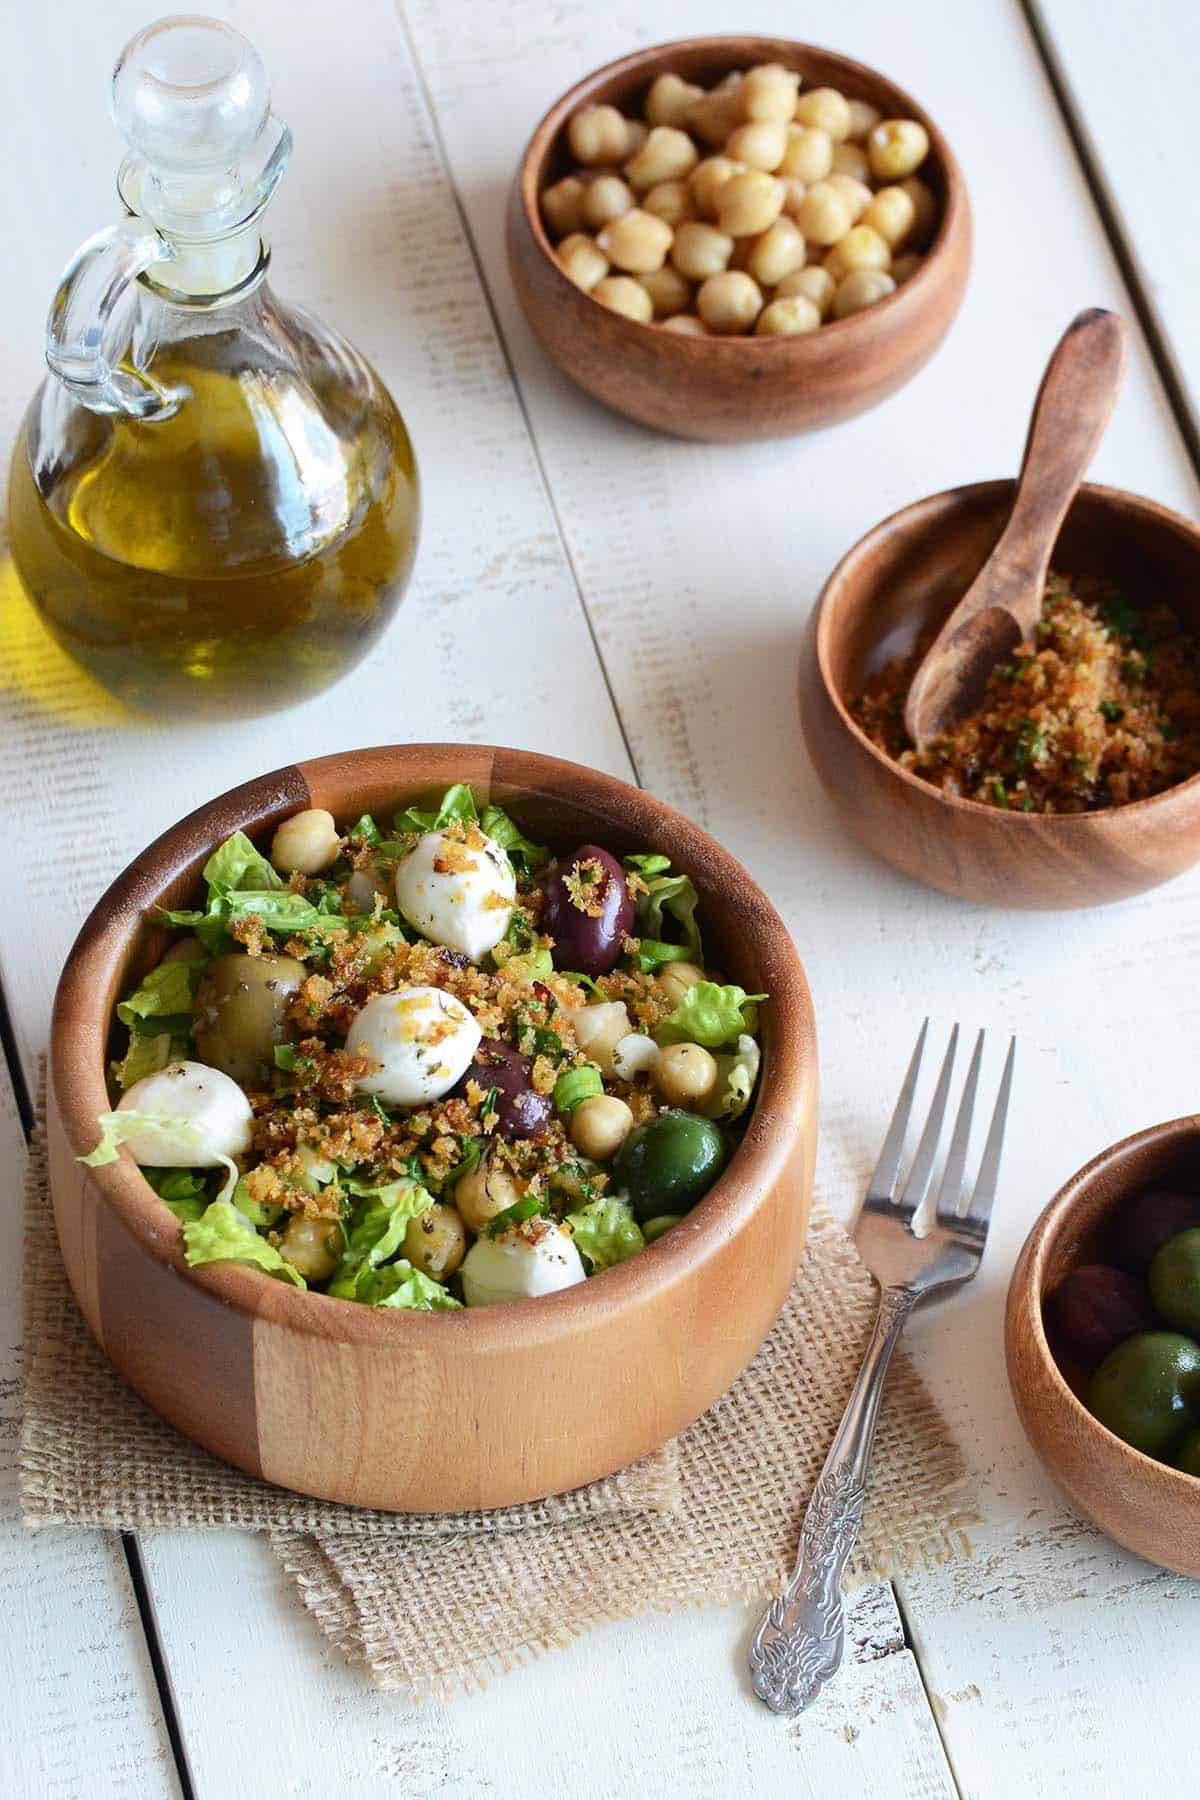 bread crumb salad in wooden bowl with jug of olive oil and other ingredients around